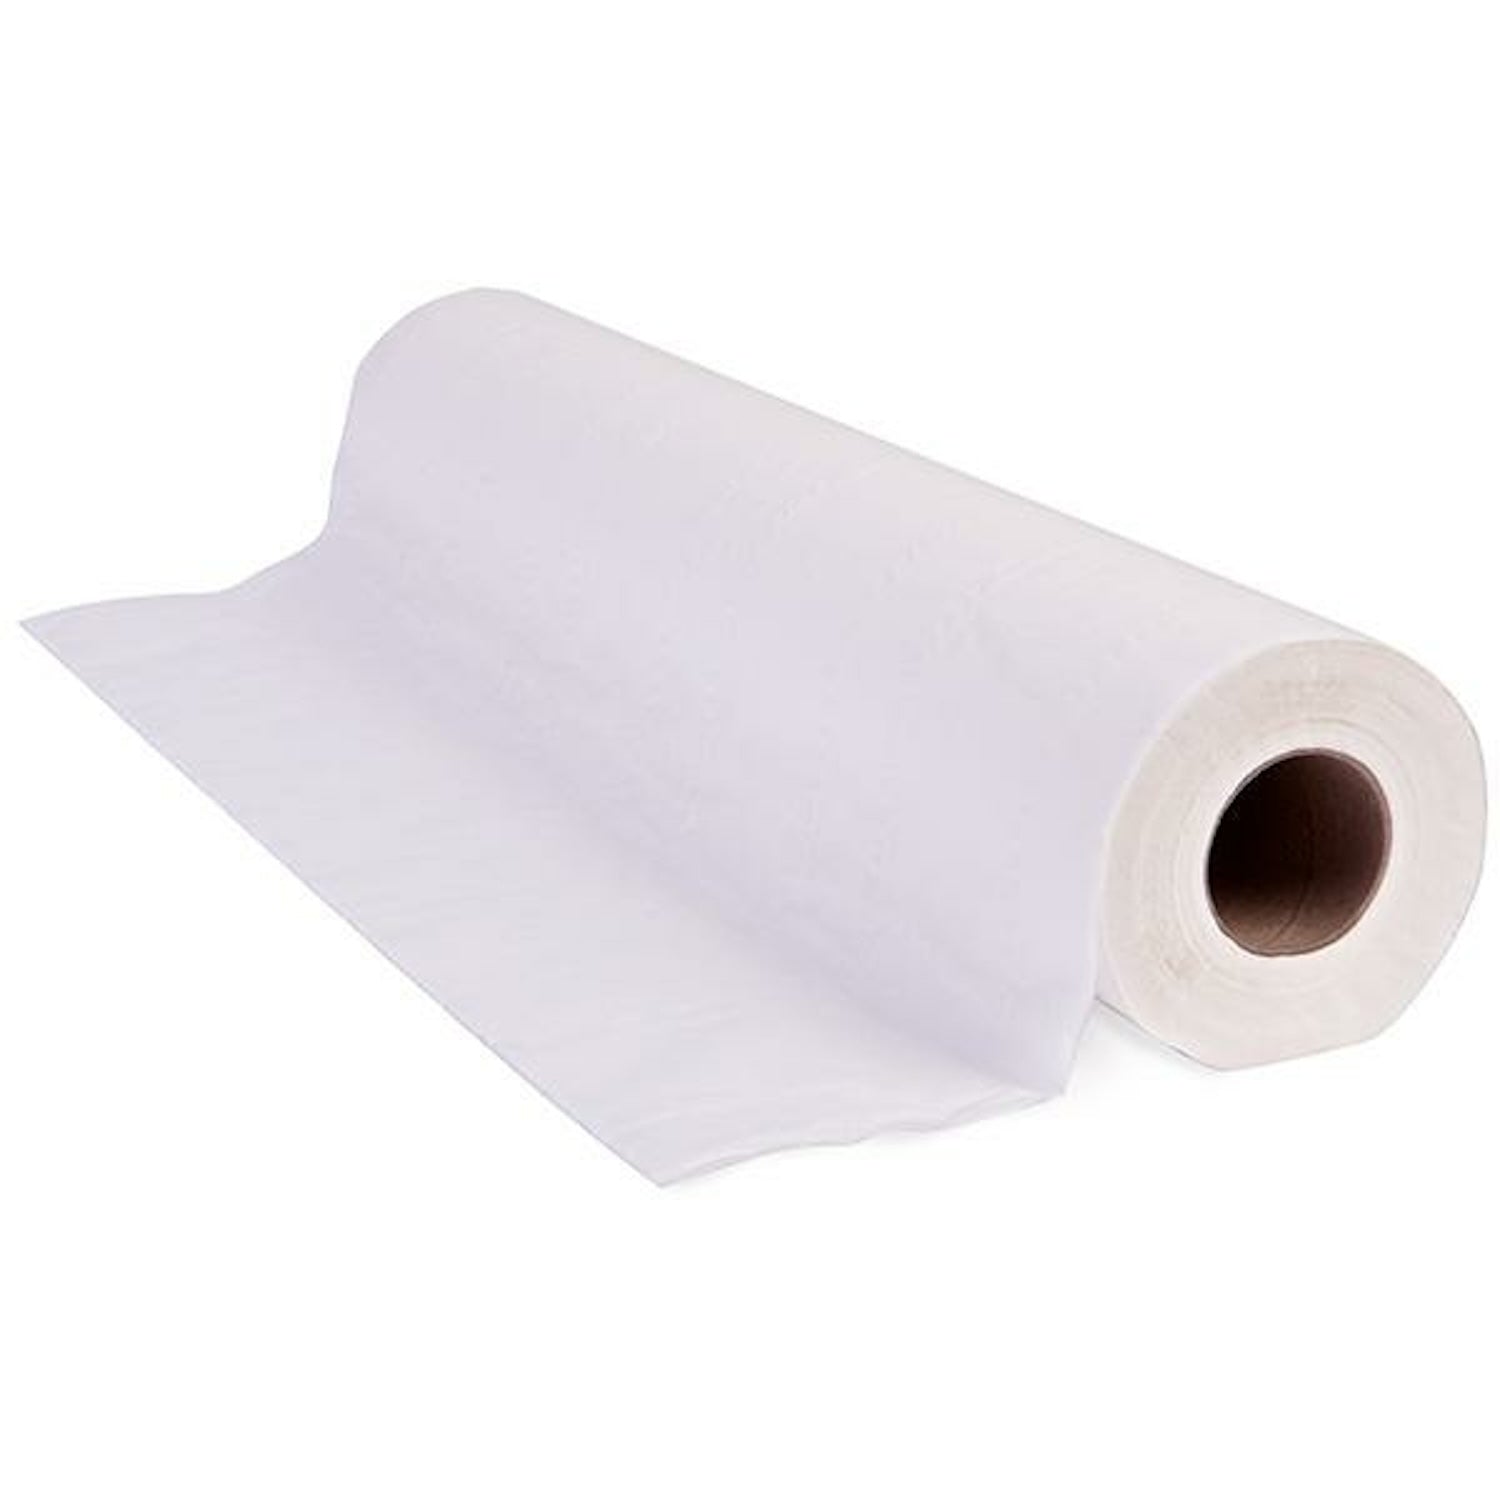 Progena Couch Rolls | 50 x 40m | 2 ply | White | Pack of 9 Rolls (1)